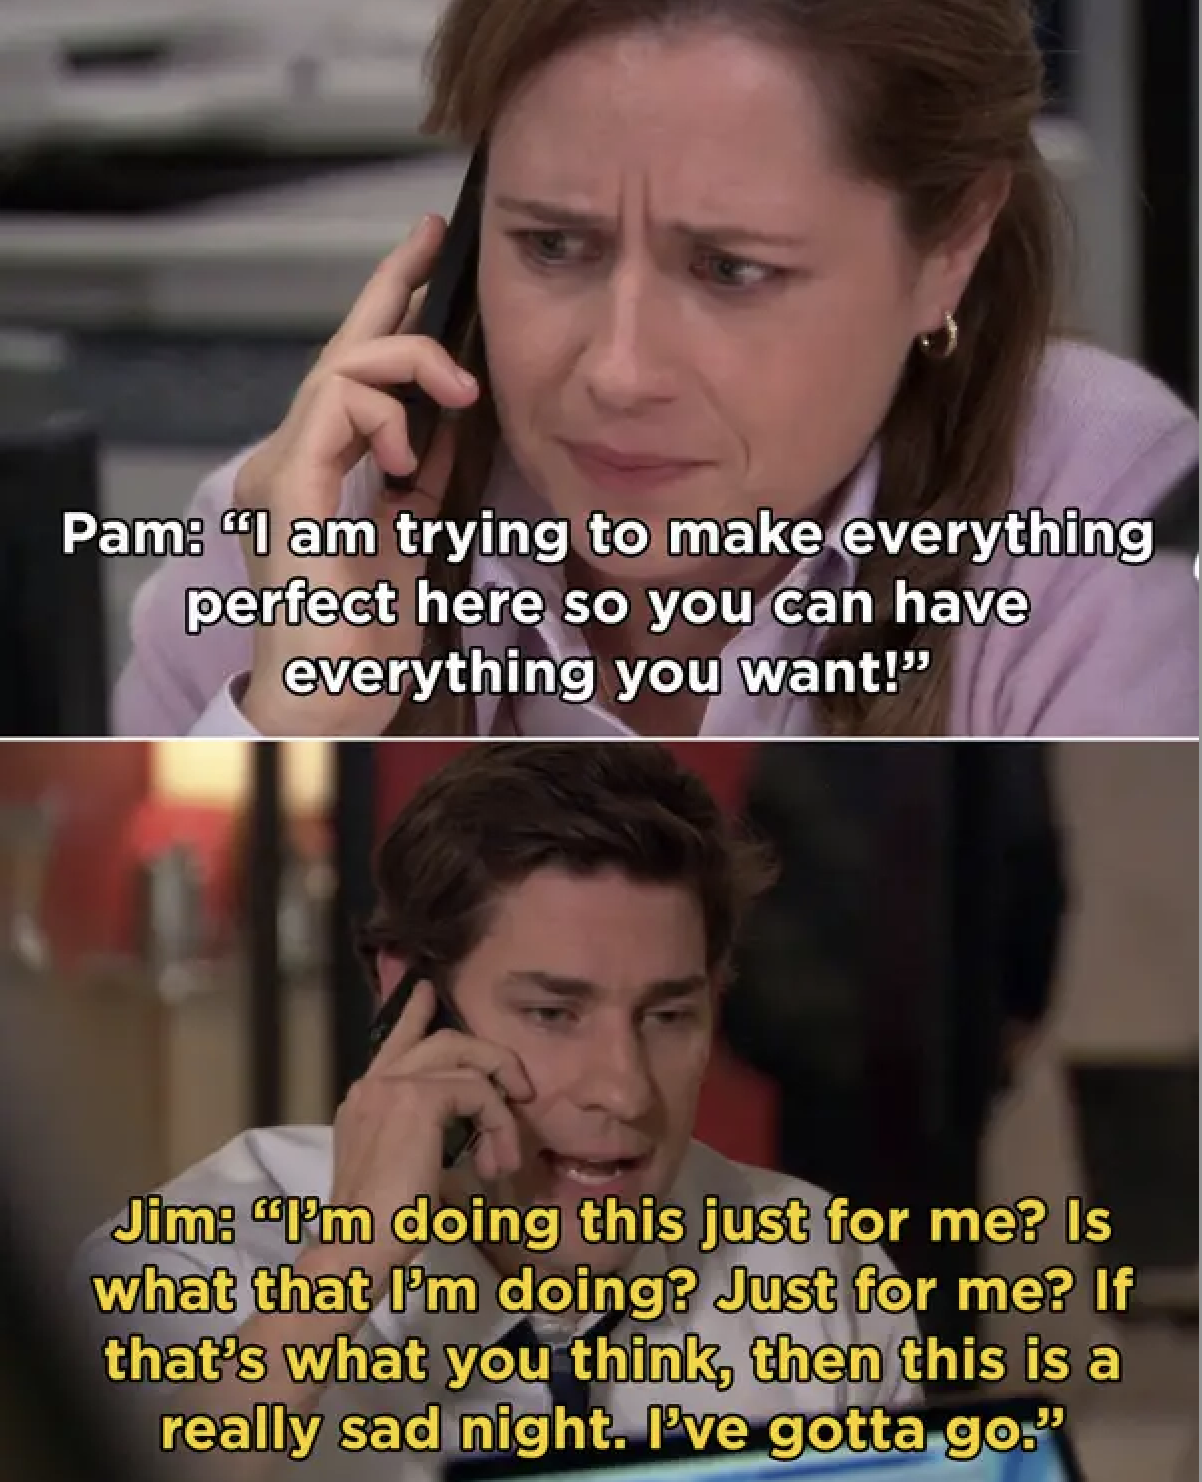 Jim telling pam he needs to hang up if she think he took the job just for himself